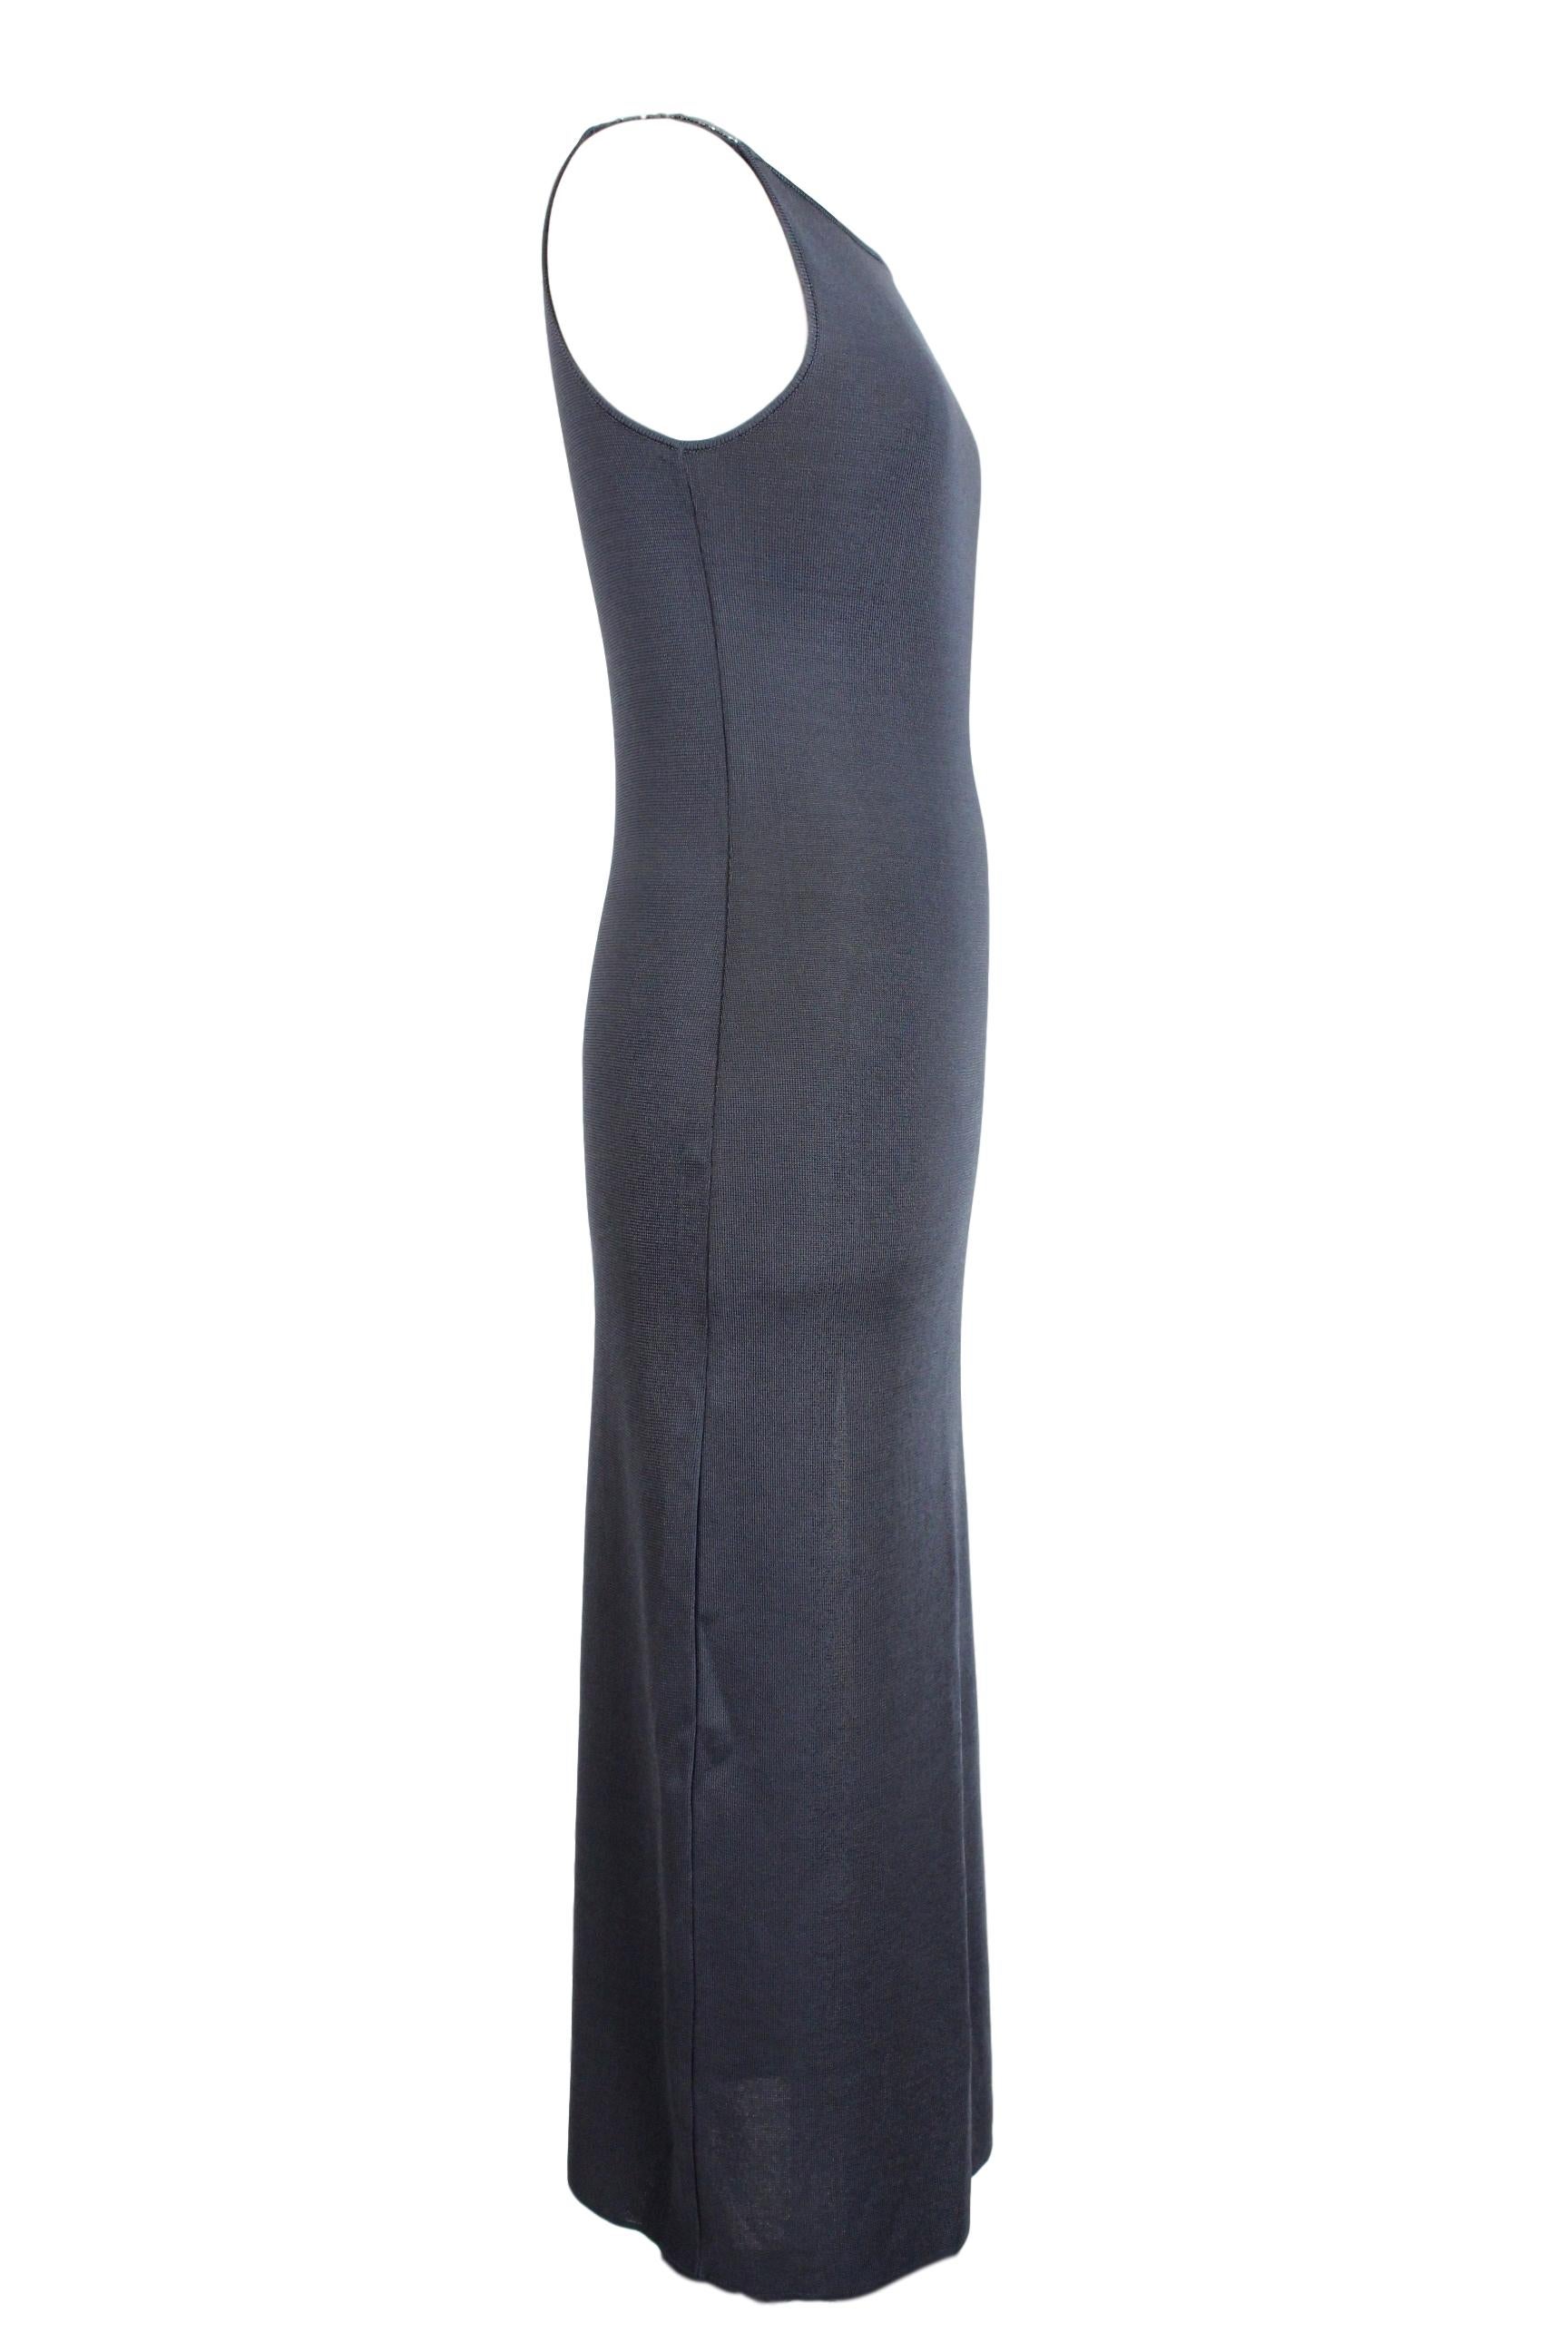 Gianfranco Ferre Viscose Gray Evening Sequins Long Sheath Sleeveless Dress In Excellent Condition In Brindisi, Bt